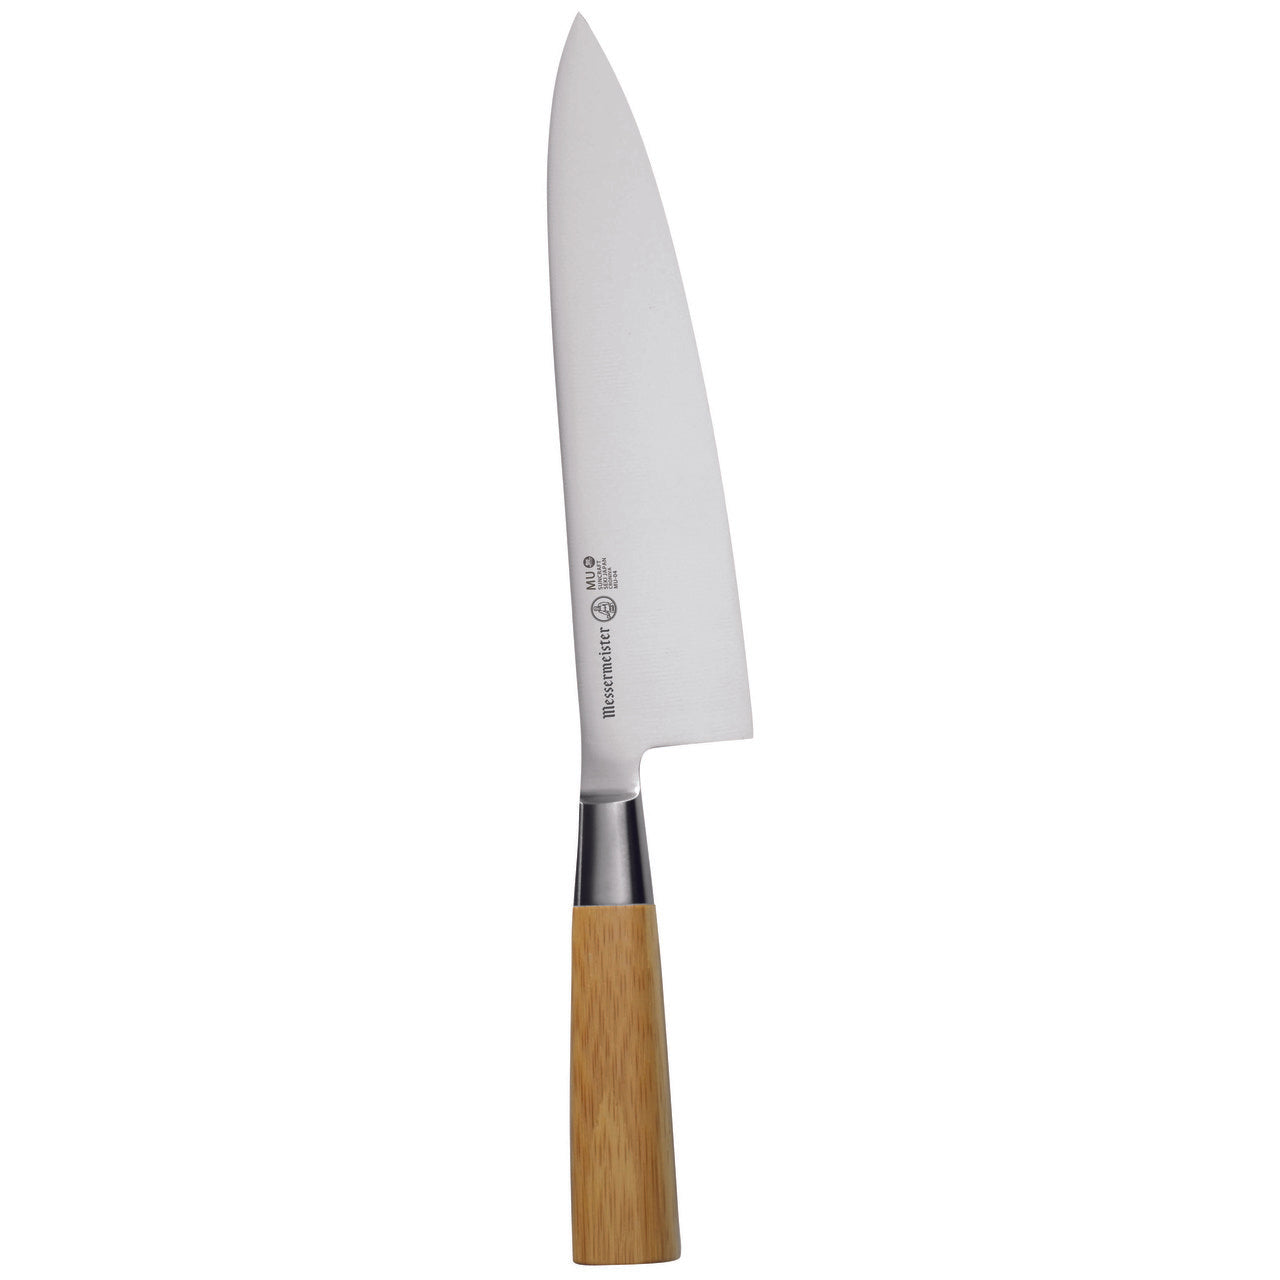 BEON.COM.AU 5001 2         Four Seasons 2 Inch Garnishing Knife The Messermeister Four Seasons 2 Inch Garnishing Knife is ideal for intricate cuts and carving details into small fruits or vegetables. This knife has a stamped, curved blade making it a great utility for managing cuts and garnishes for rounded ... Messermeister at BEON.COM.AU